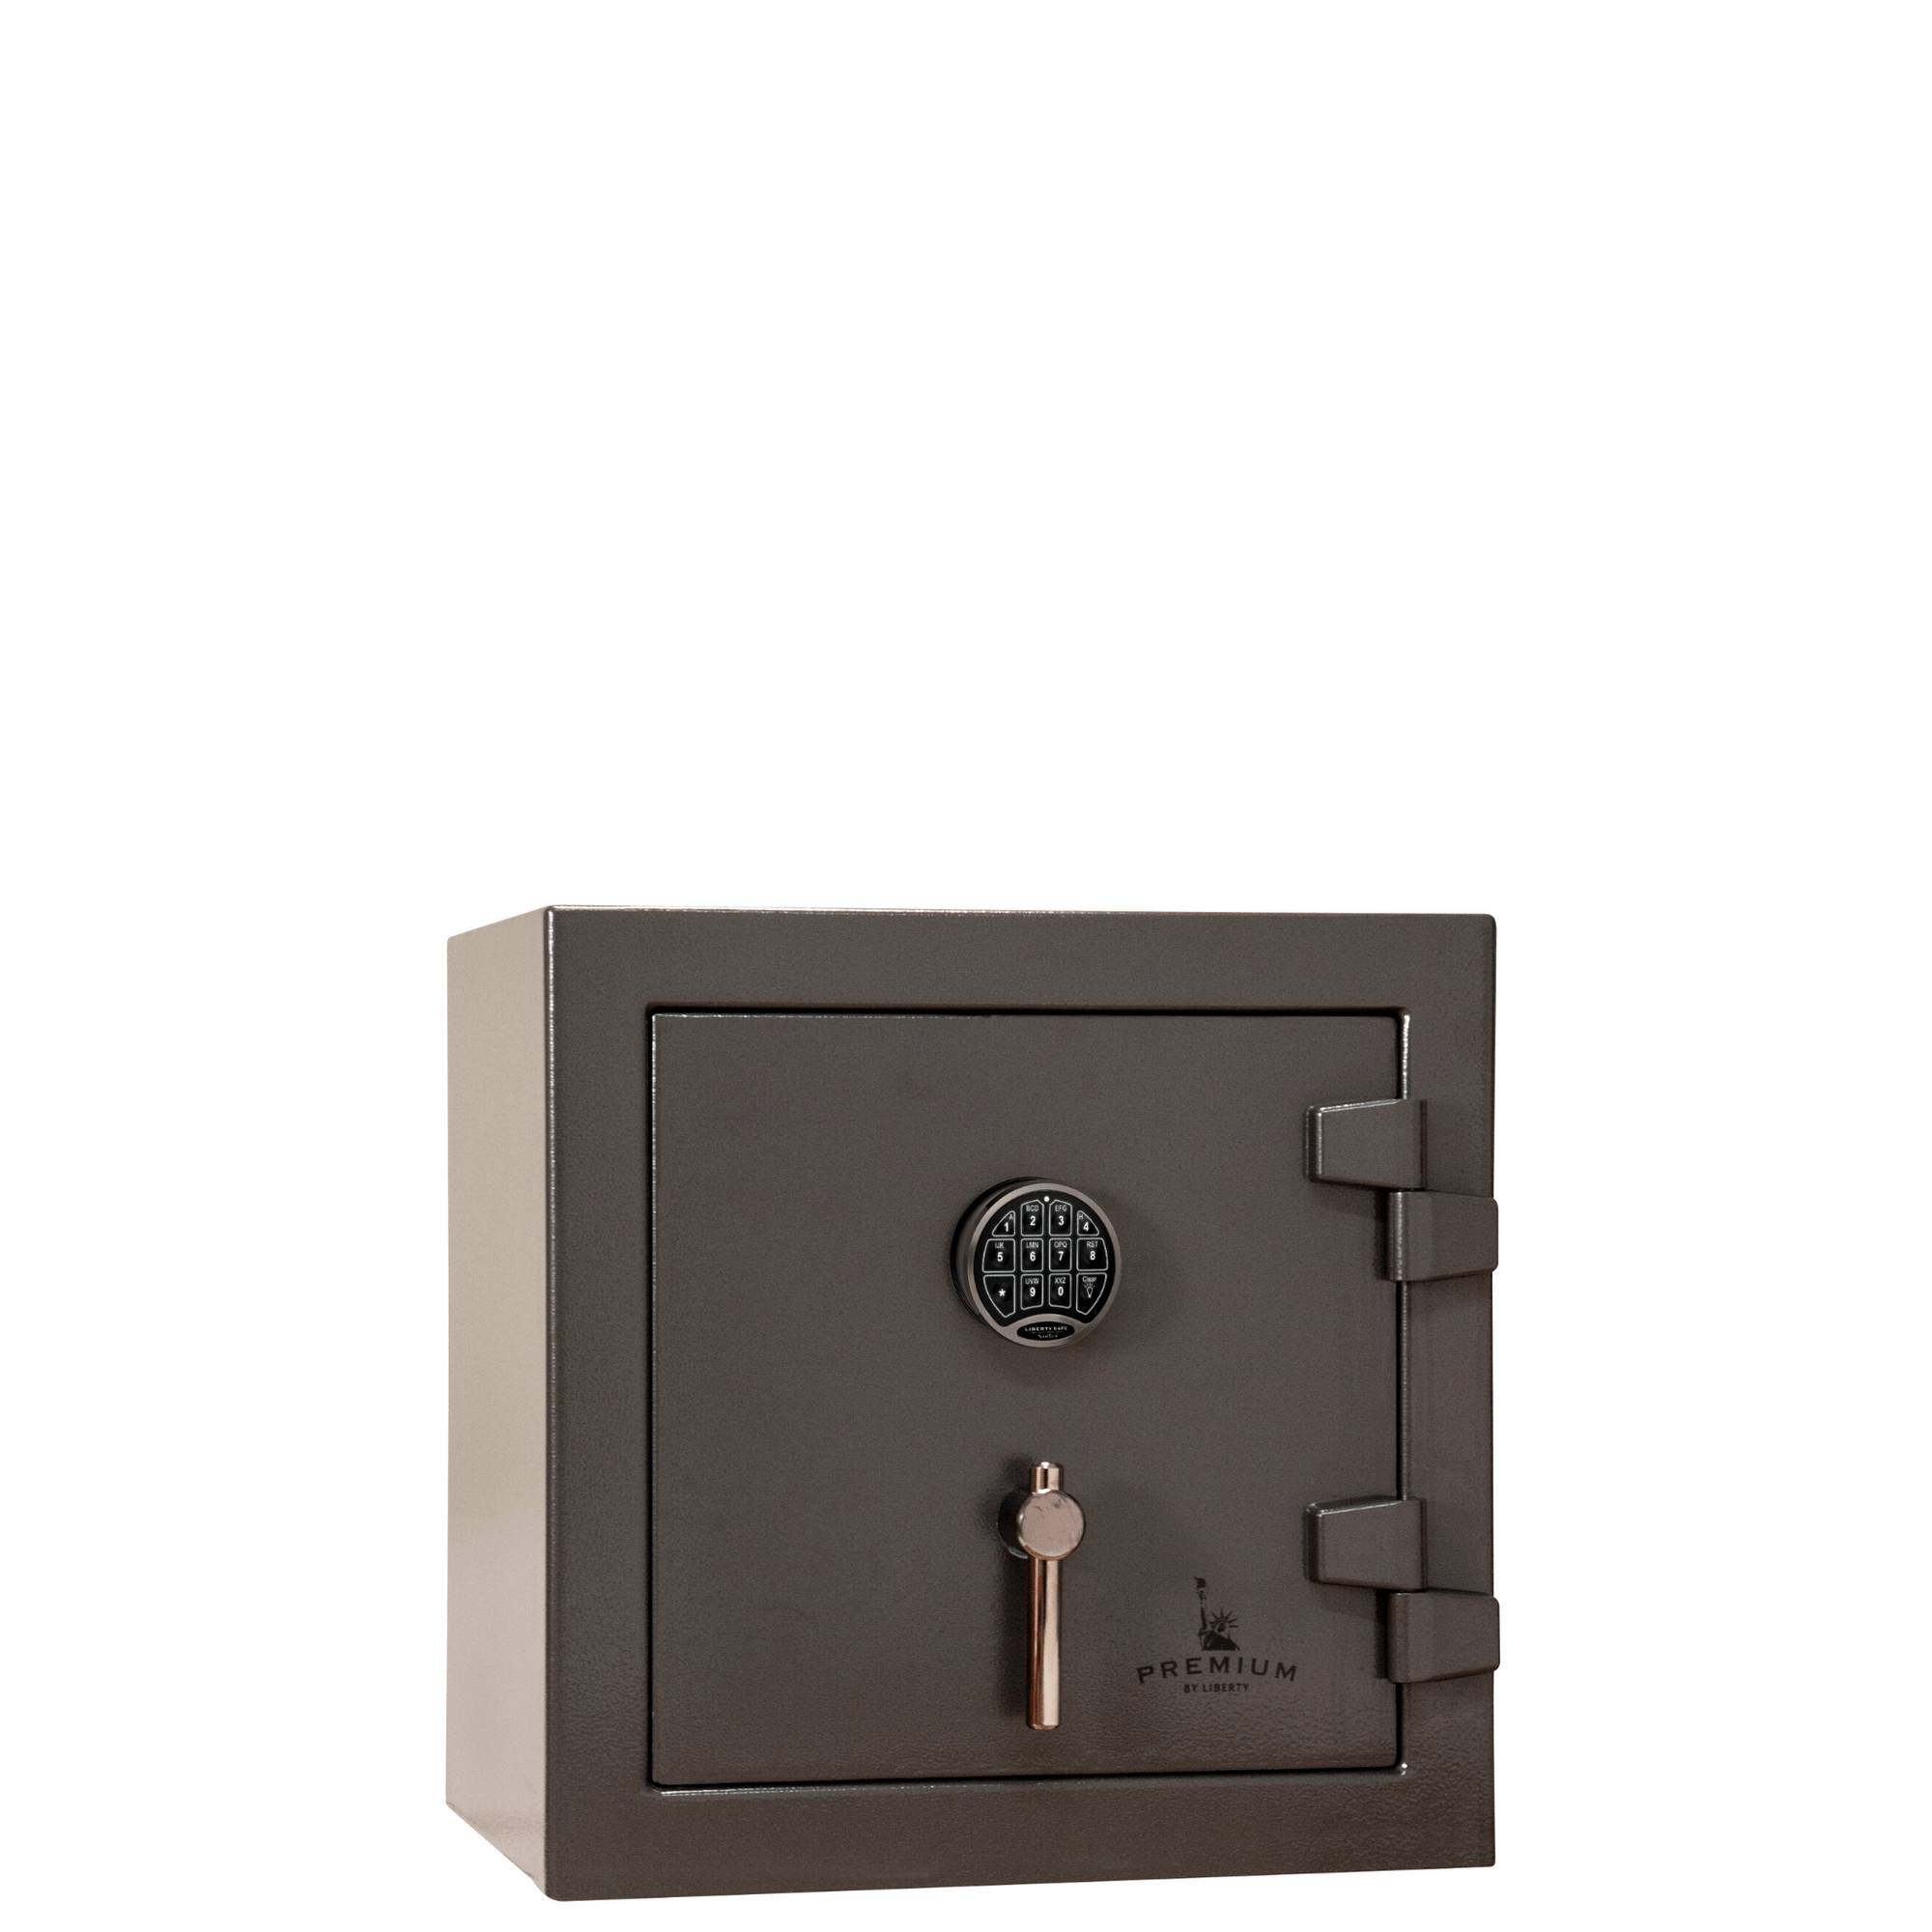 Premium Home | 05 | 90 Minute Fire Protection | Gray | Electronic Lock | Dimensions: 24"(H) x 24"(W) x 22.5"(D)